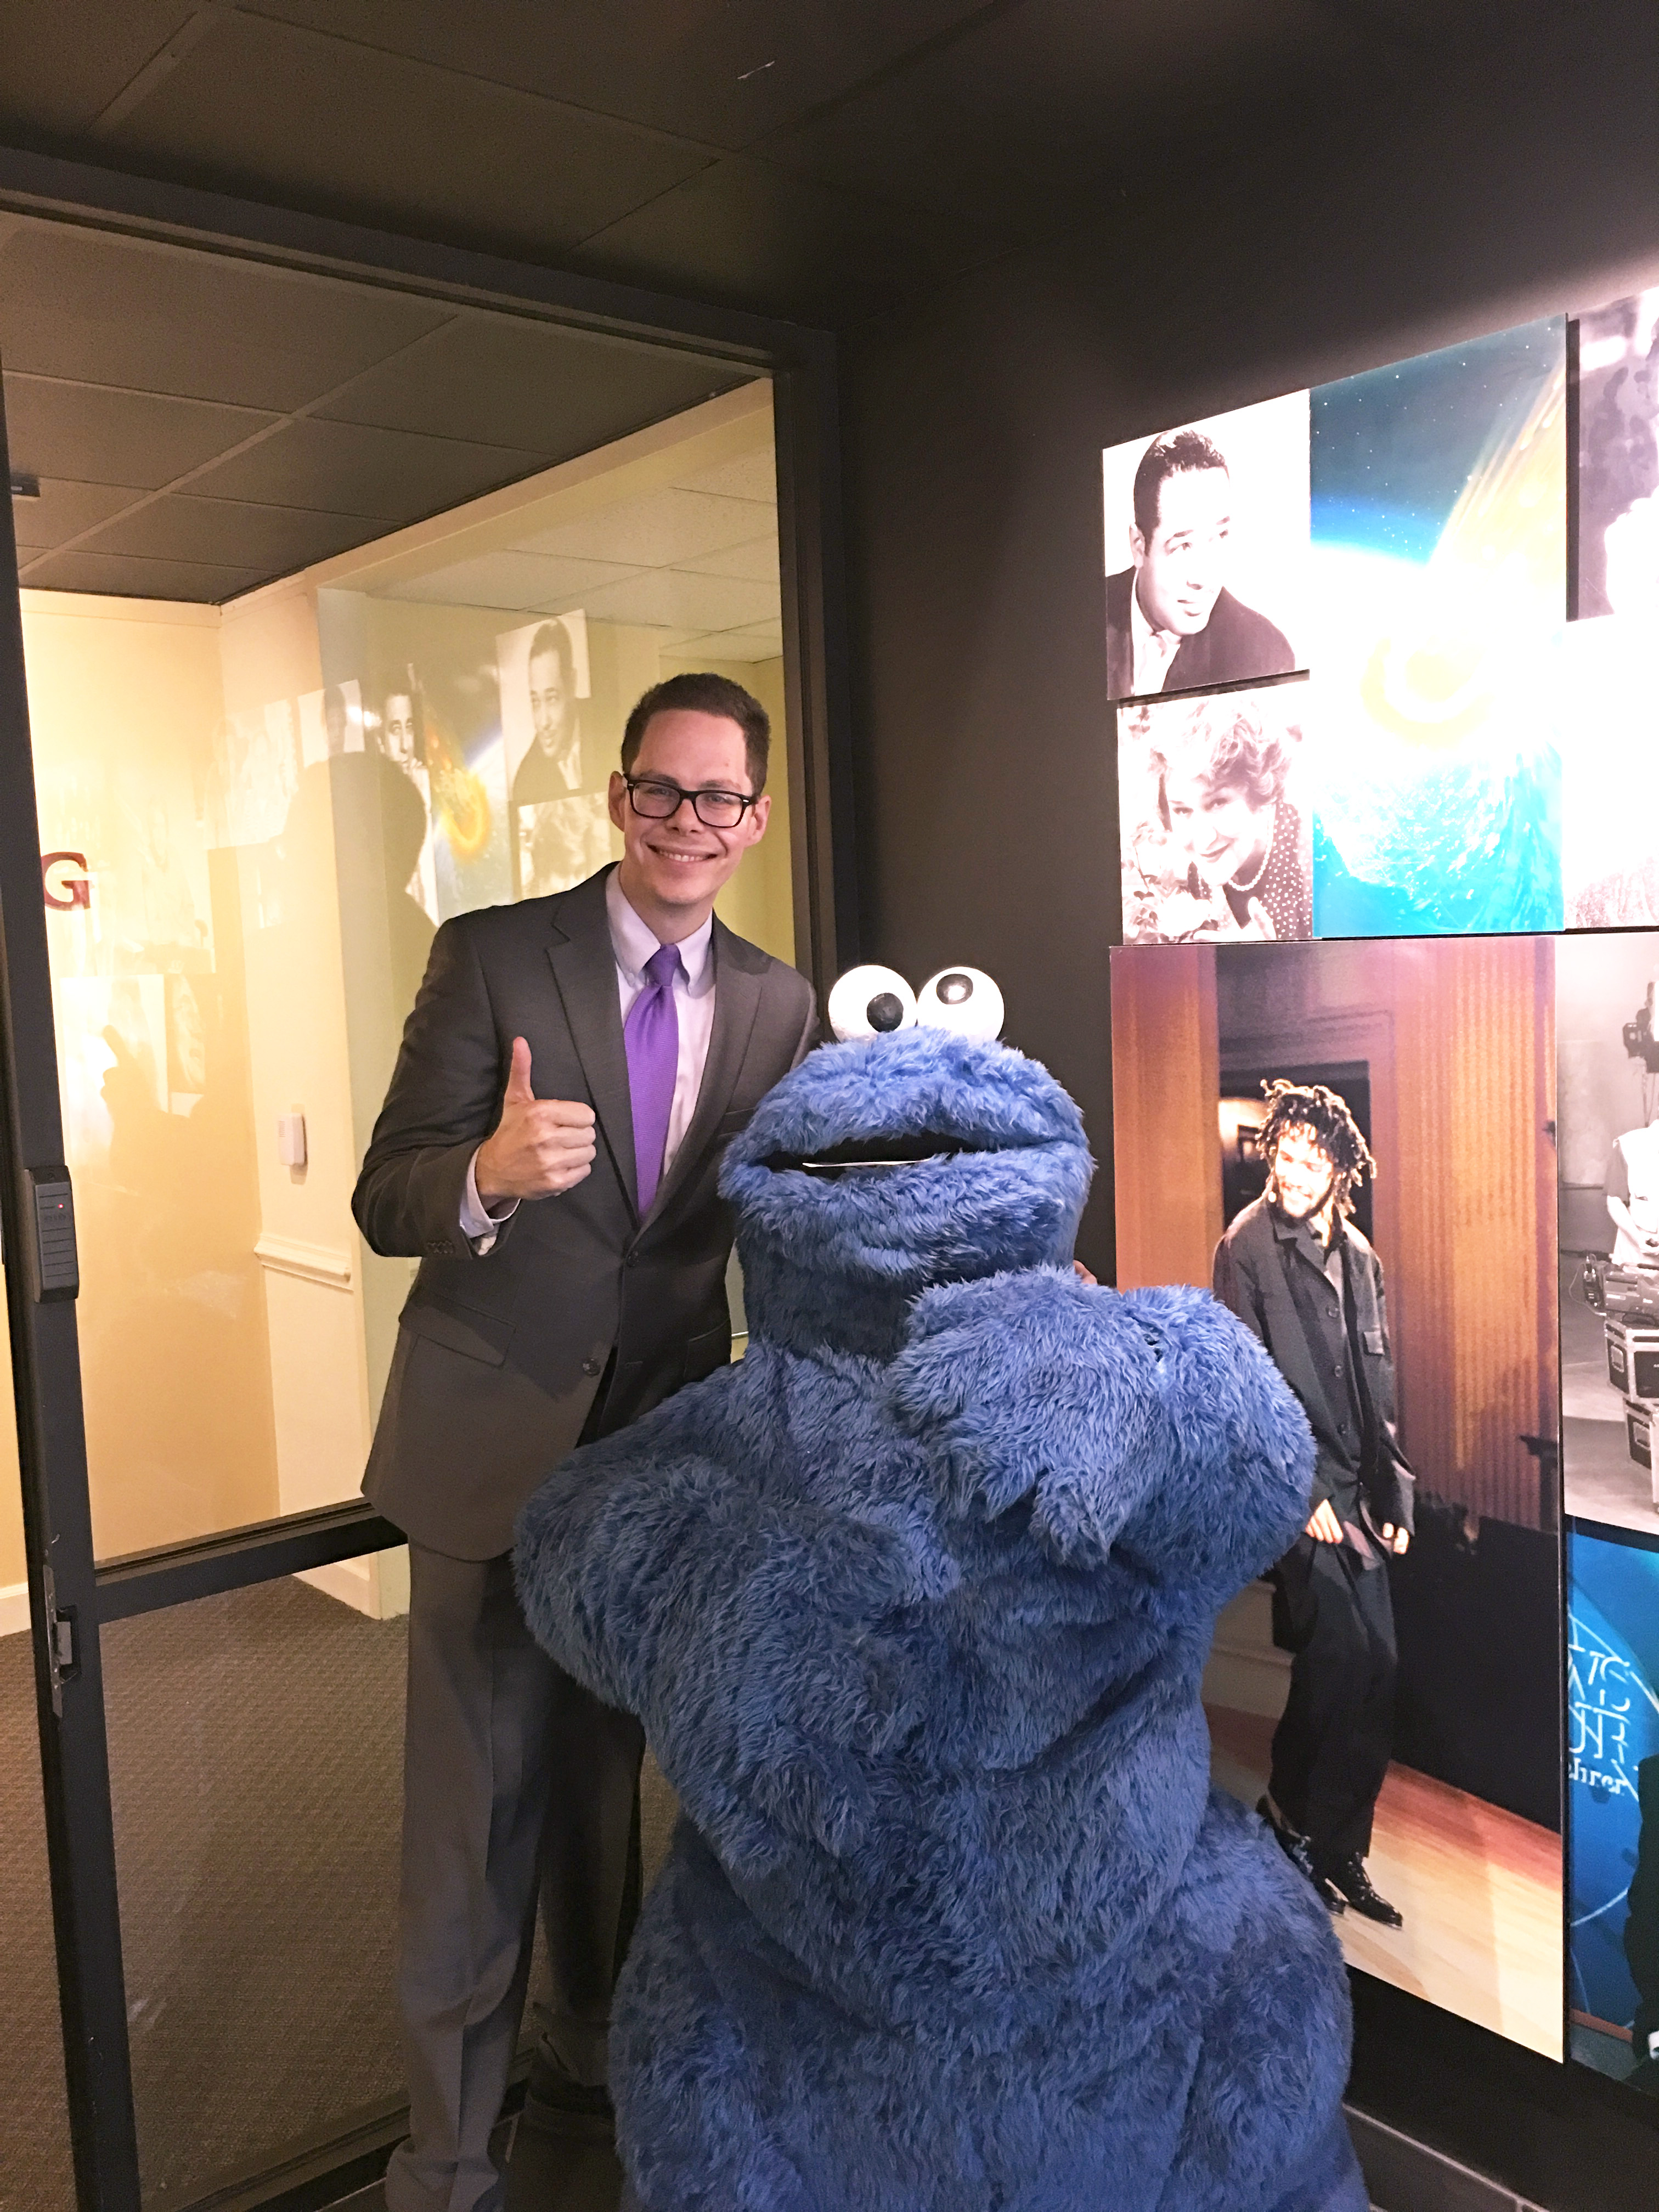 Dr. Jon Snider posing with a person dressed as Sesame Street's cookie monster at the PBS station in Richmond.